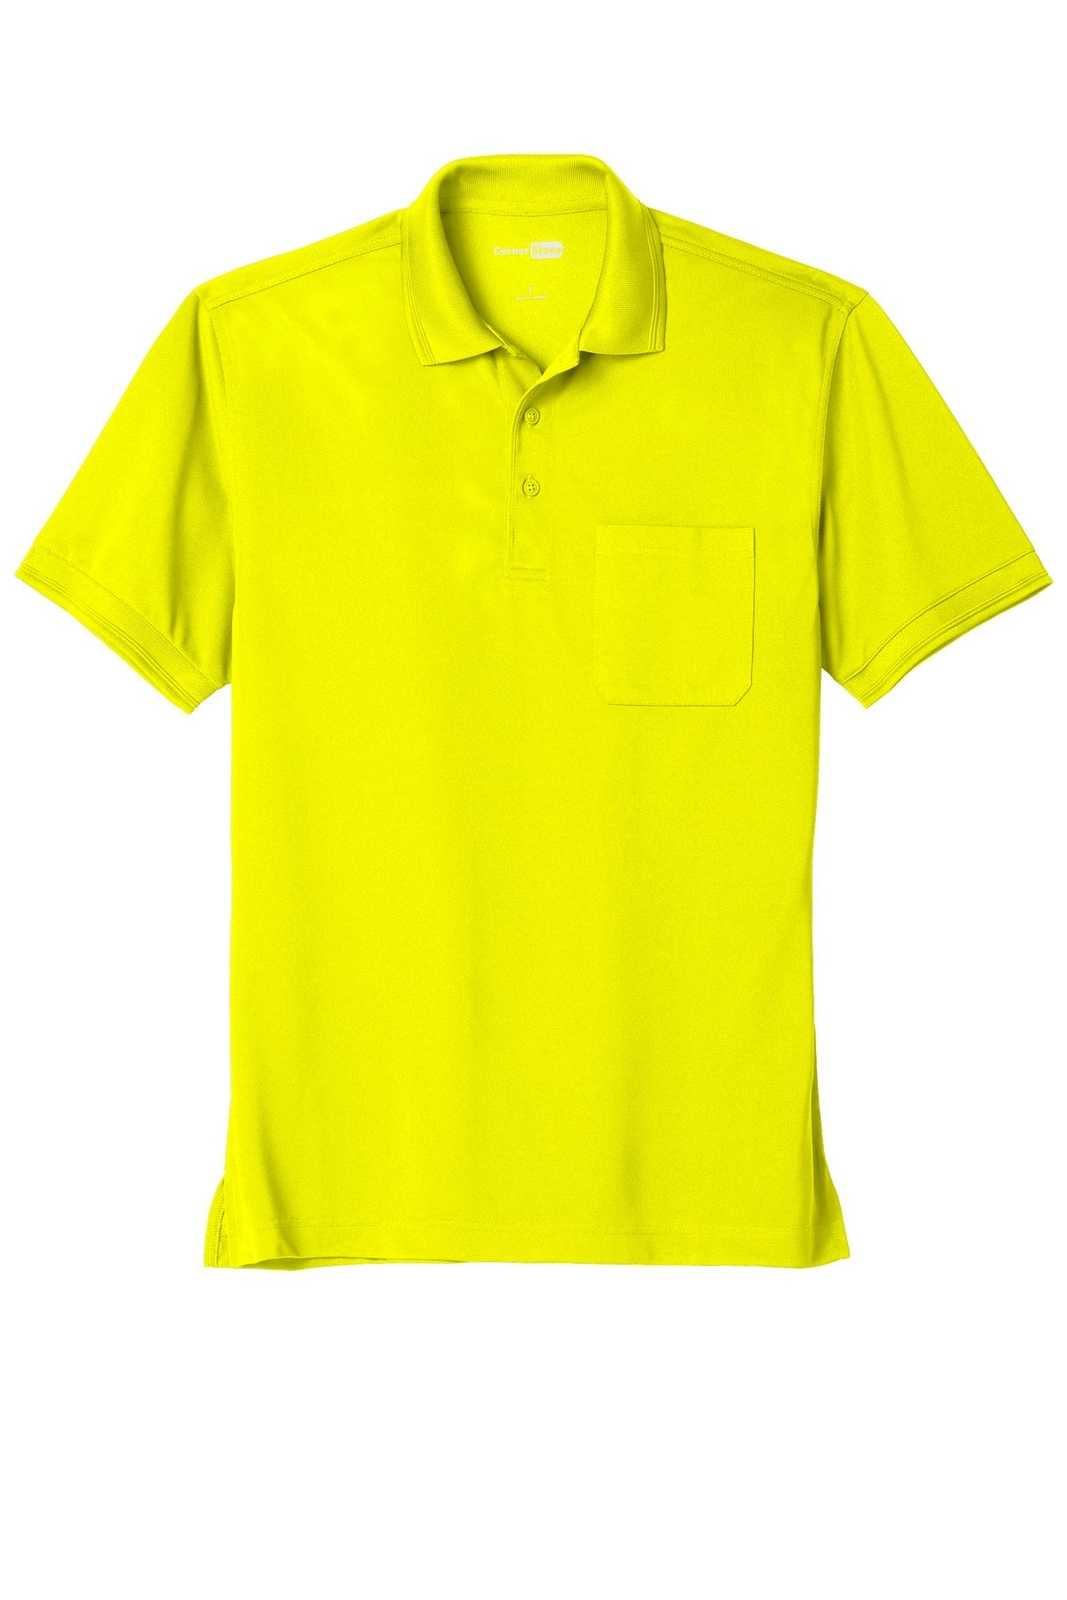 CornerStone CS4020P Industrial Snag-Proof Pique Pocket Polo - Safety Yellow - HIT a Double - 5